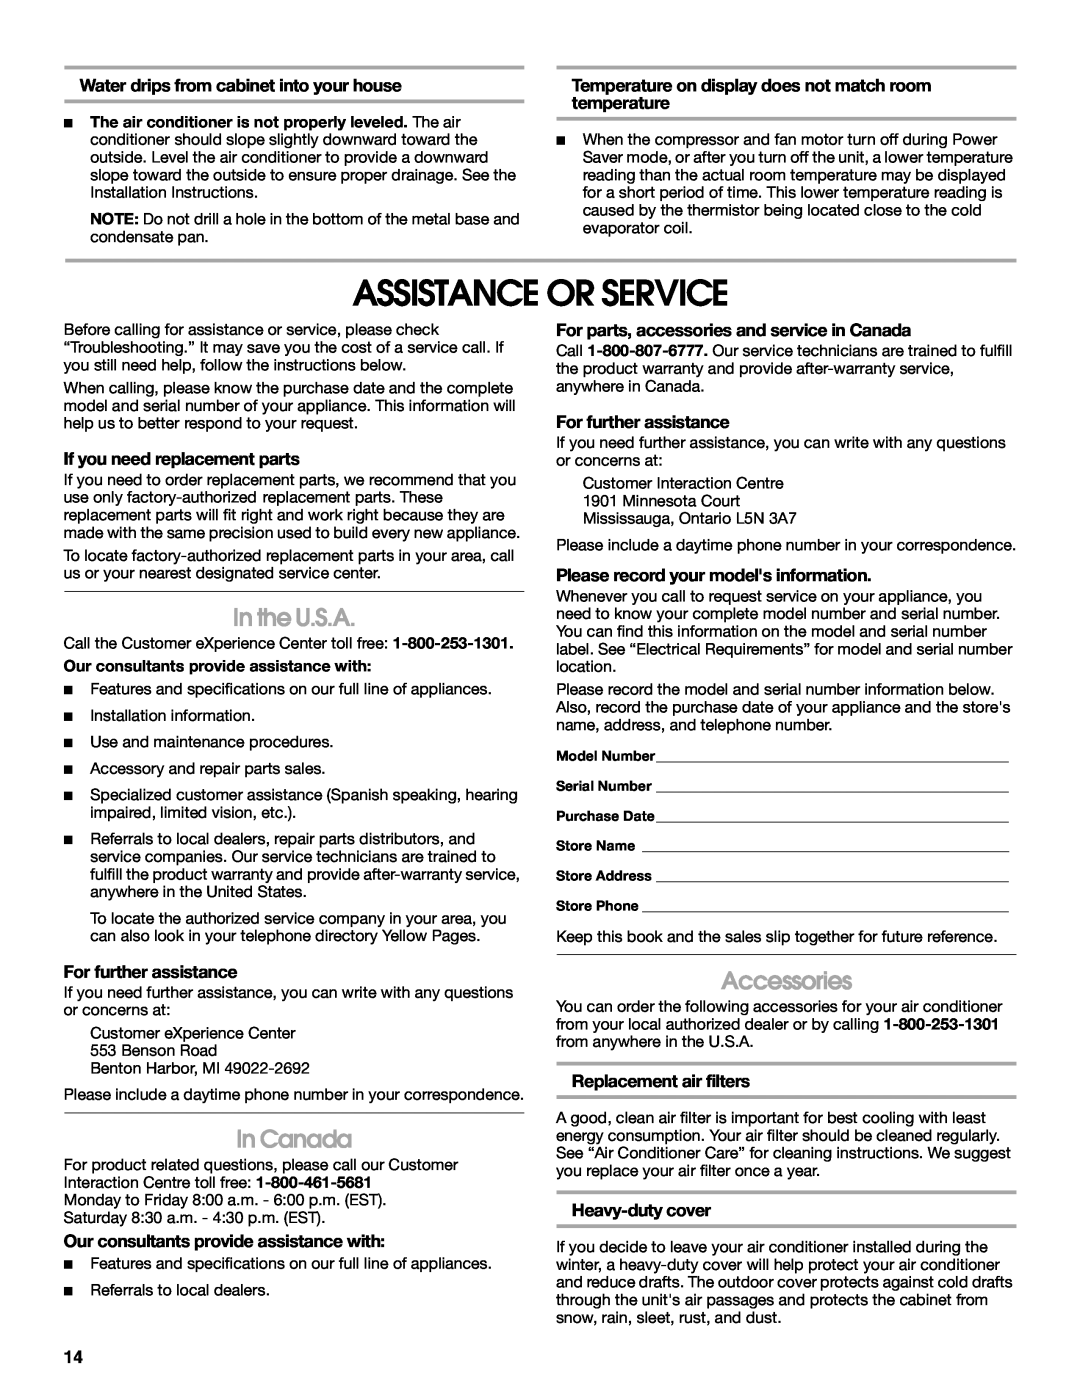 Whirlpool ACM052PS0 Assistance Or Service, In the U.S.A, In Canada, Accessories, Water drips from cabinet into your house 